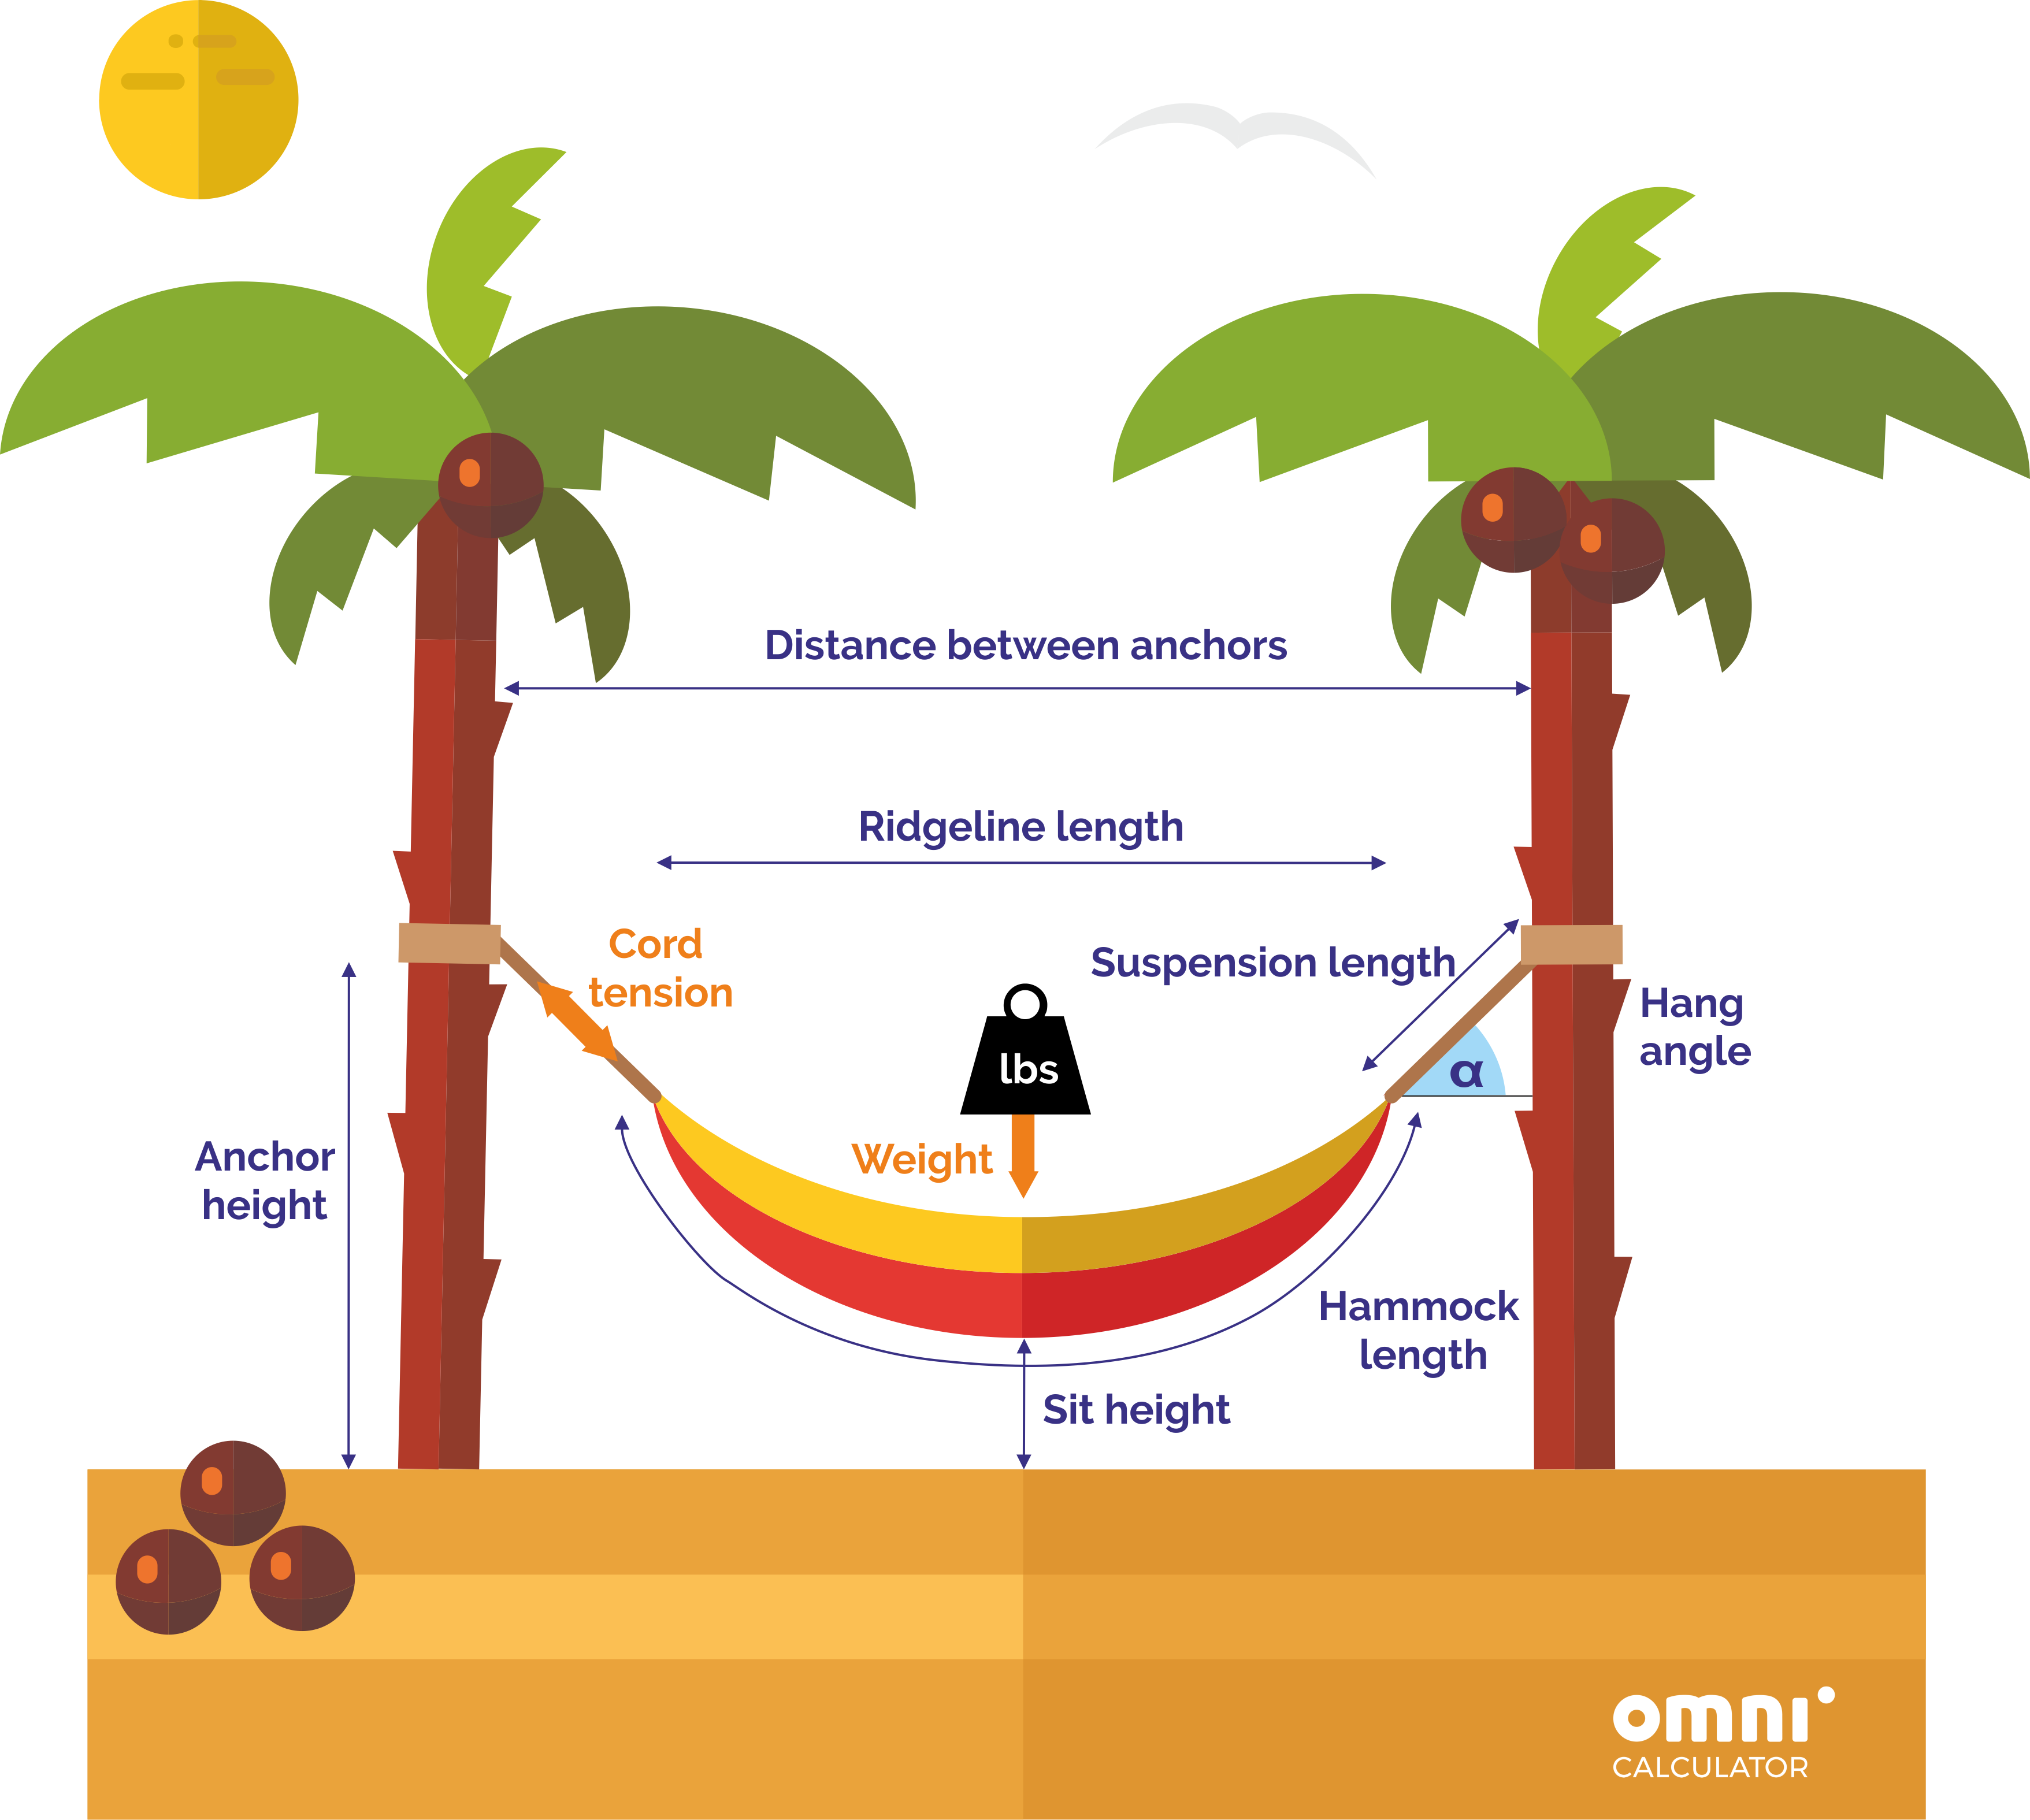 hammock image with all the variables